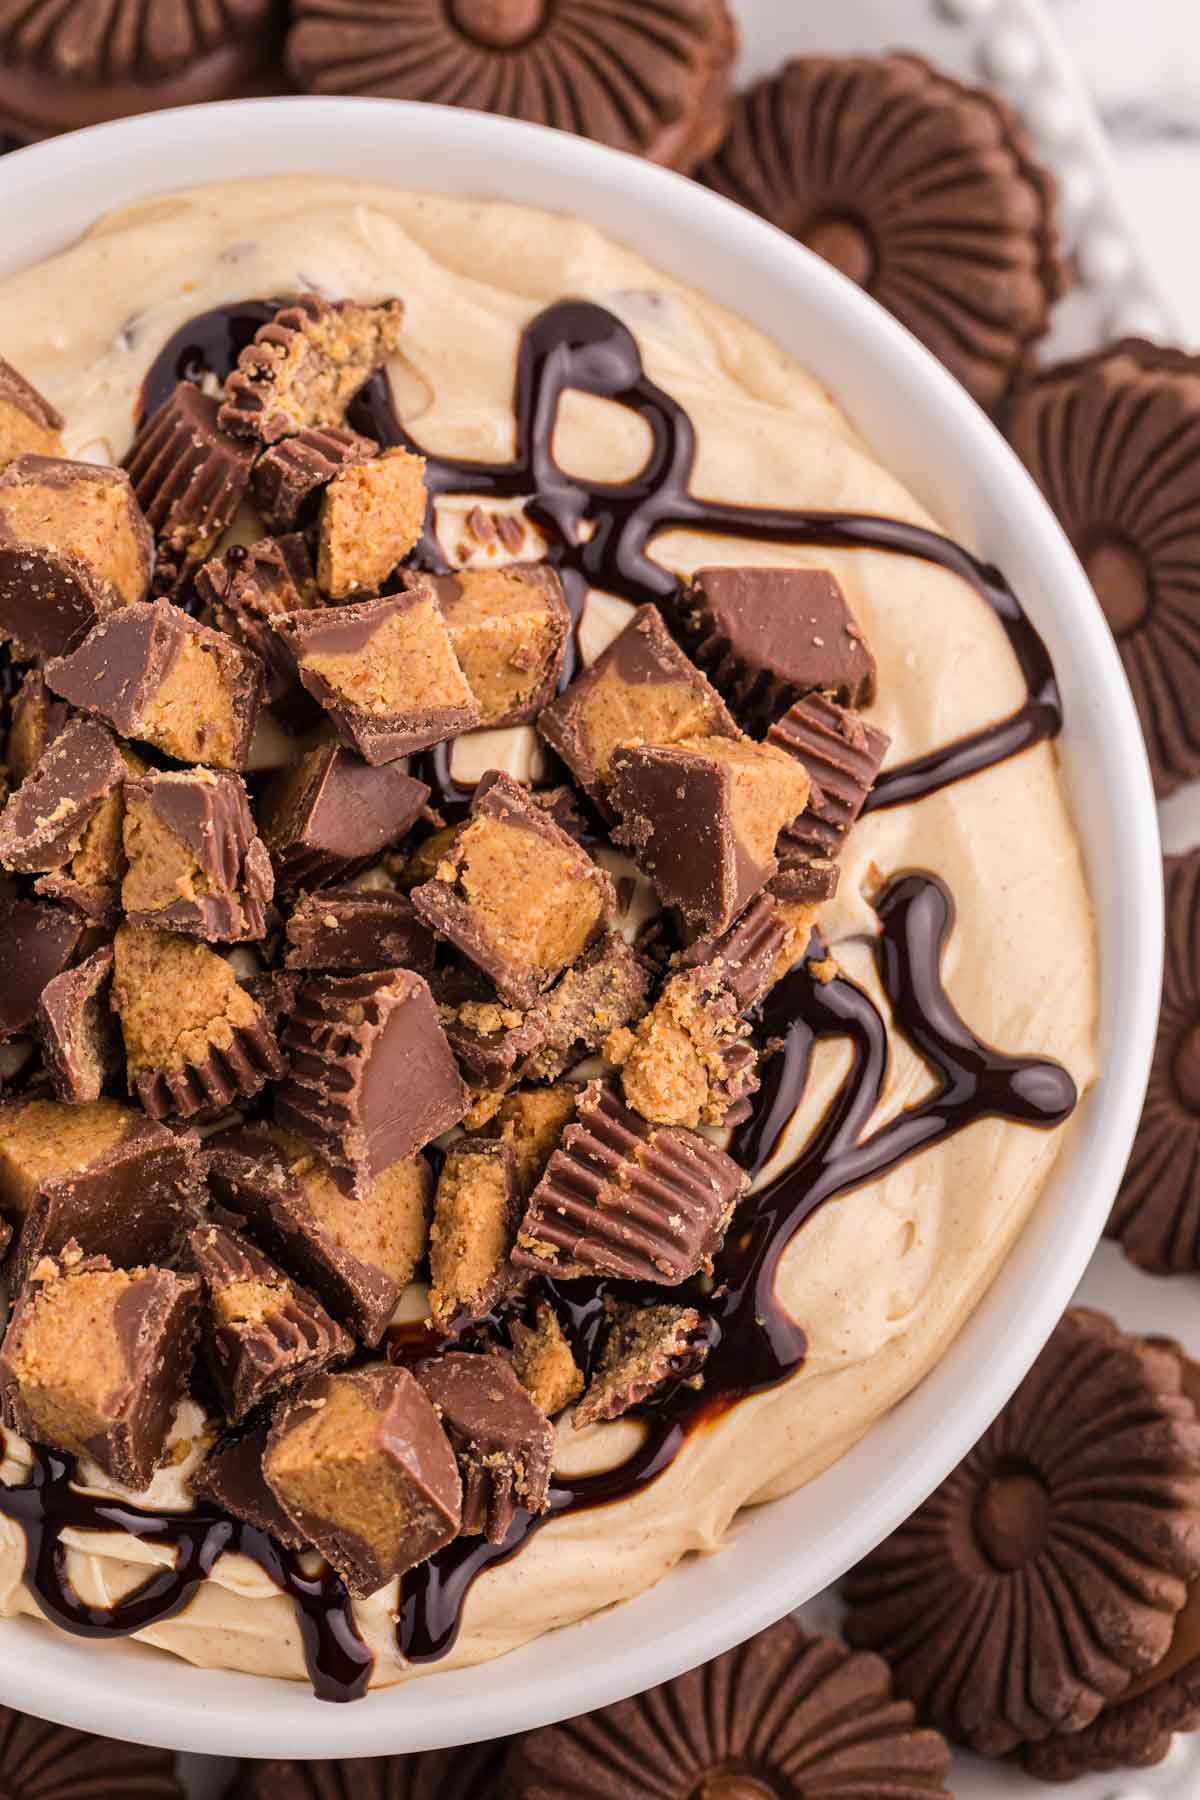 Reese's peanut butter dip drizzled with chocolate